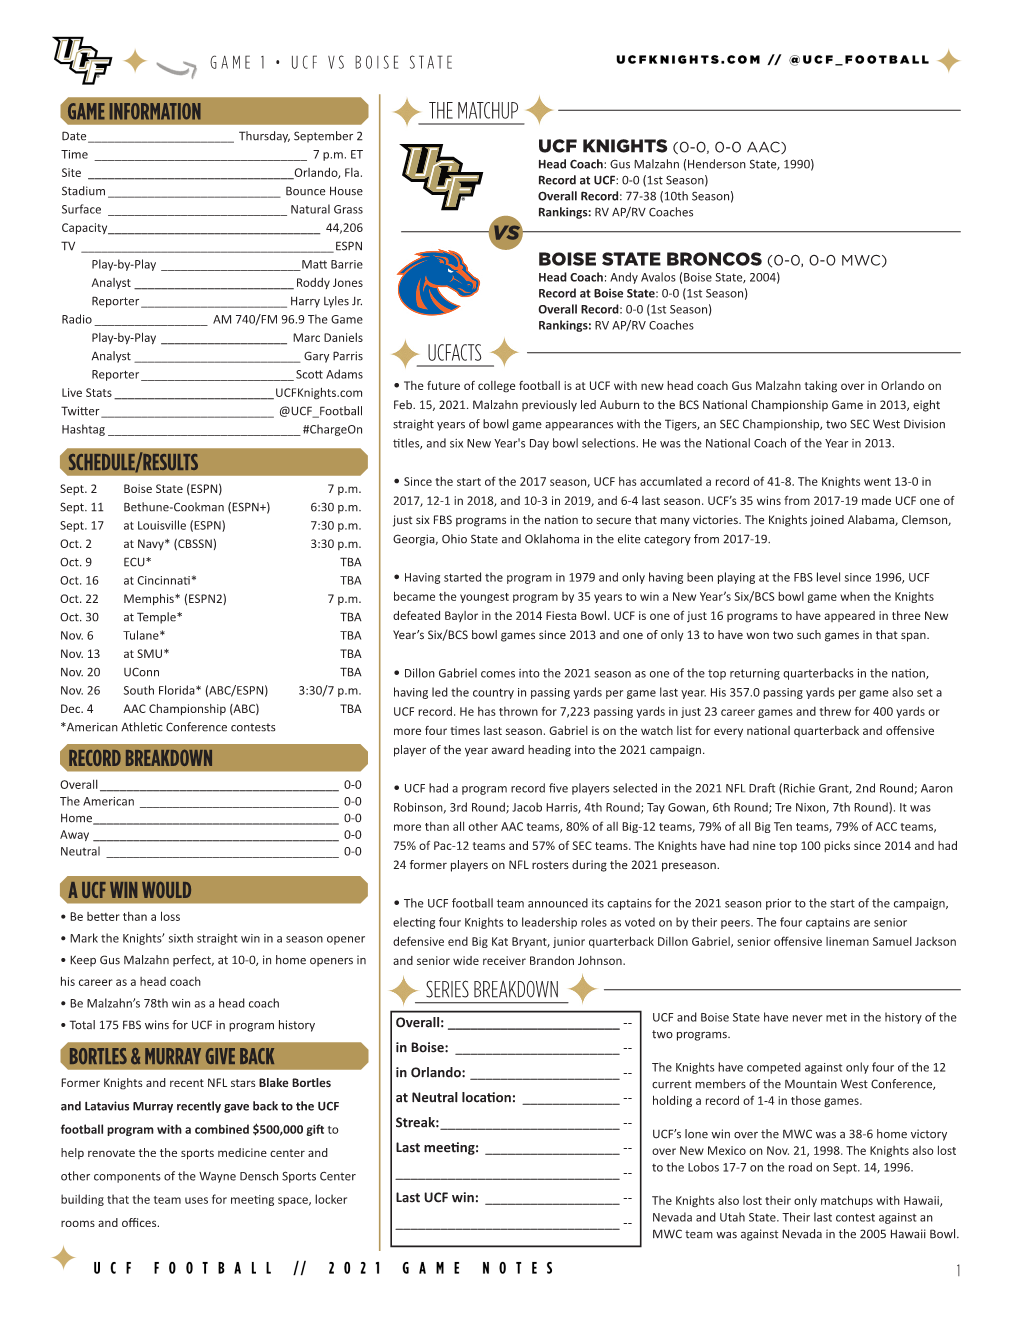 Game Information Schedule/Results Record Breakdown a Ucf Win Would the Matchup Series Breakdown Ucfacts Bortles & Murray